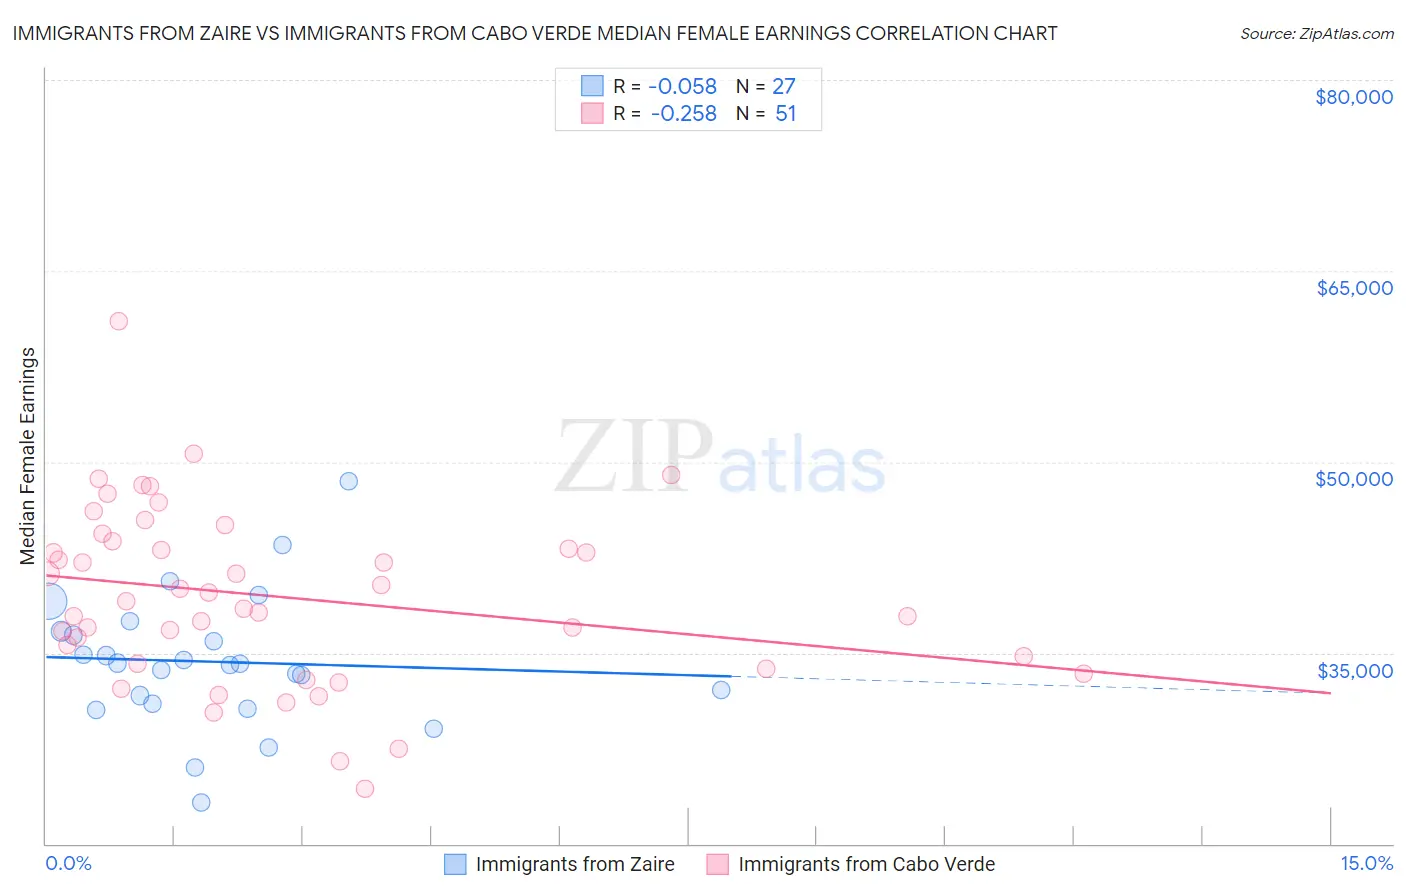 Immigrants from Zaire vs Immigrants from Cabo Verde Median Female Earnings